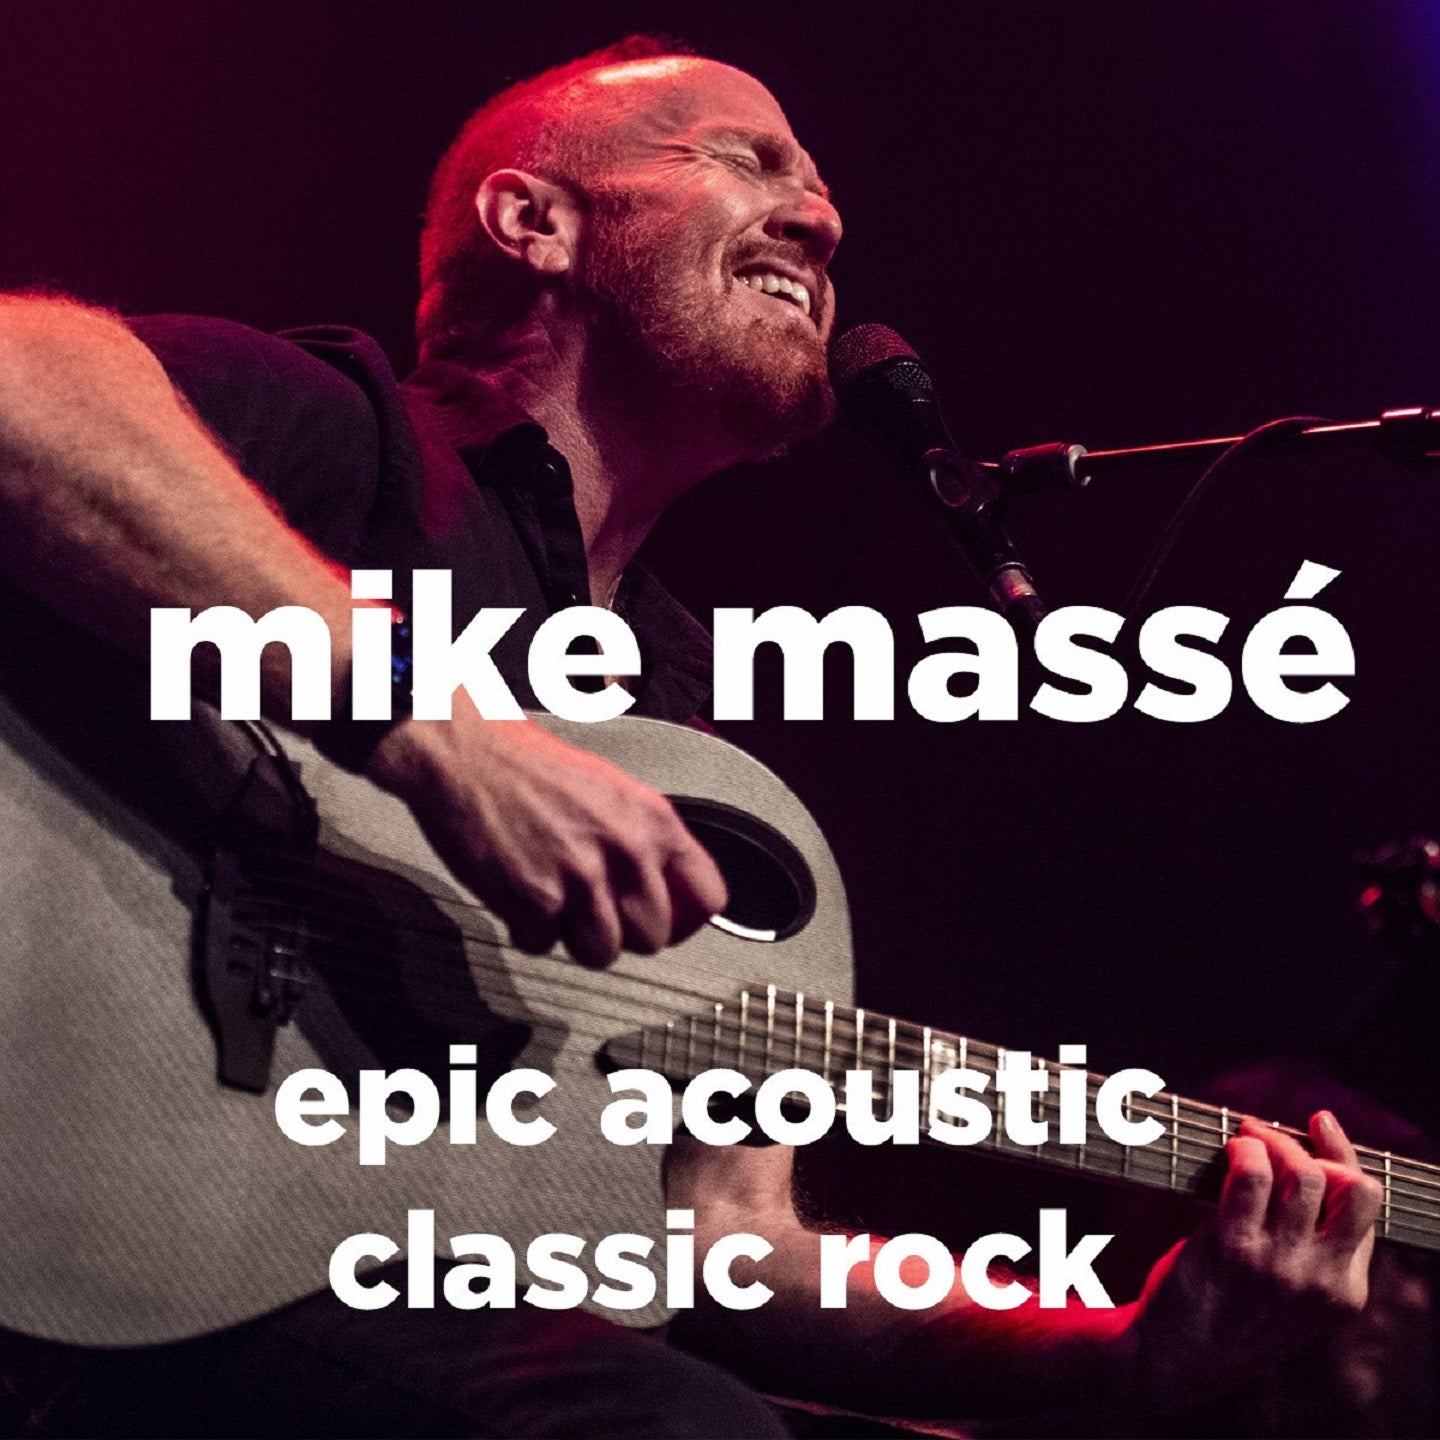 Mike Masse in Concert